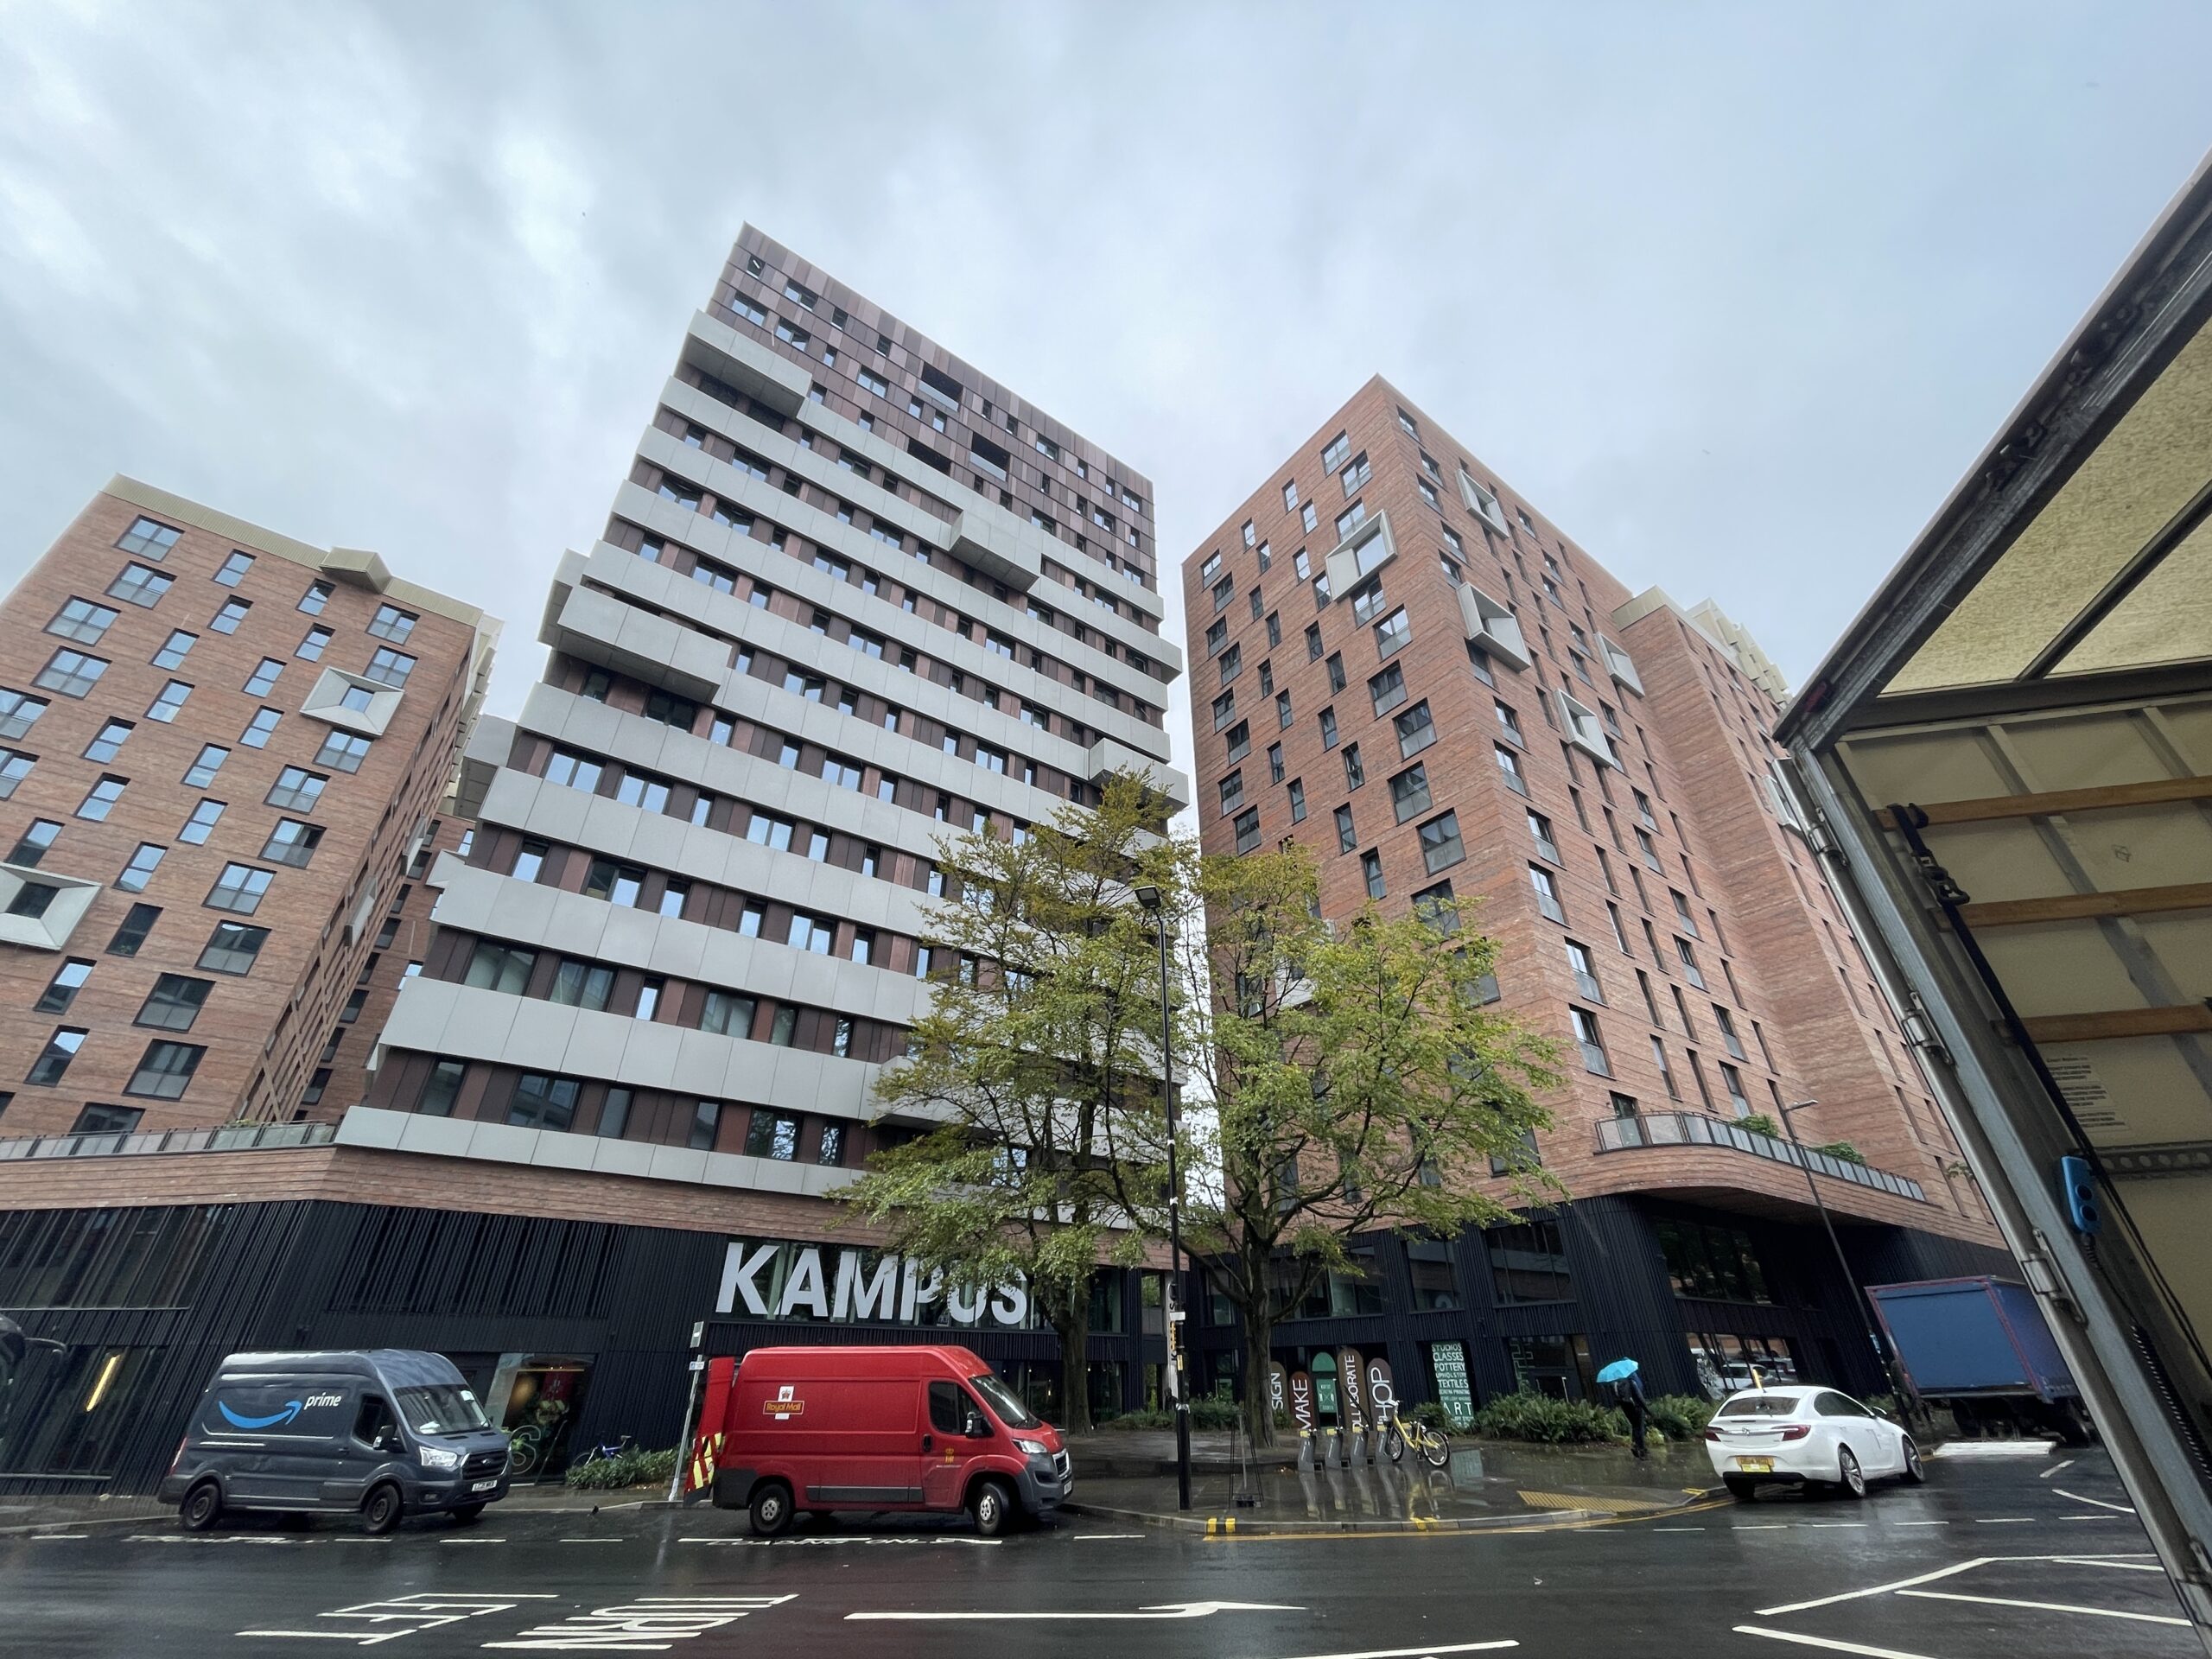 Vs how Kampus looks now. Credit: The Manc Group